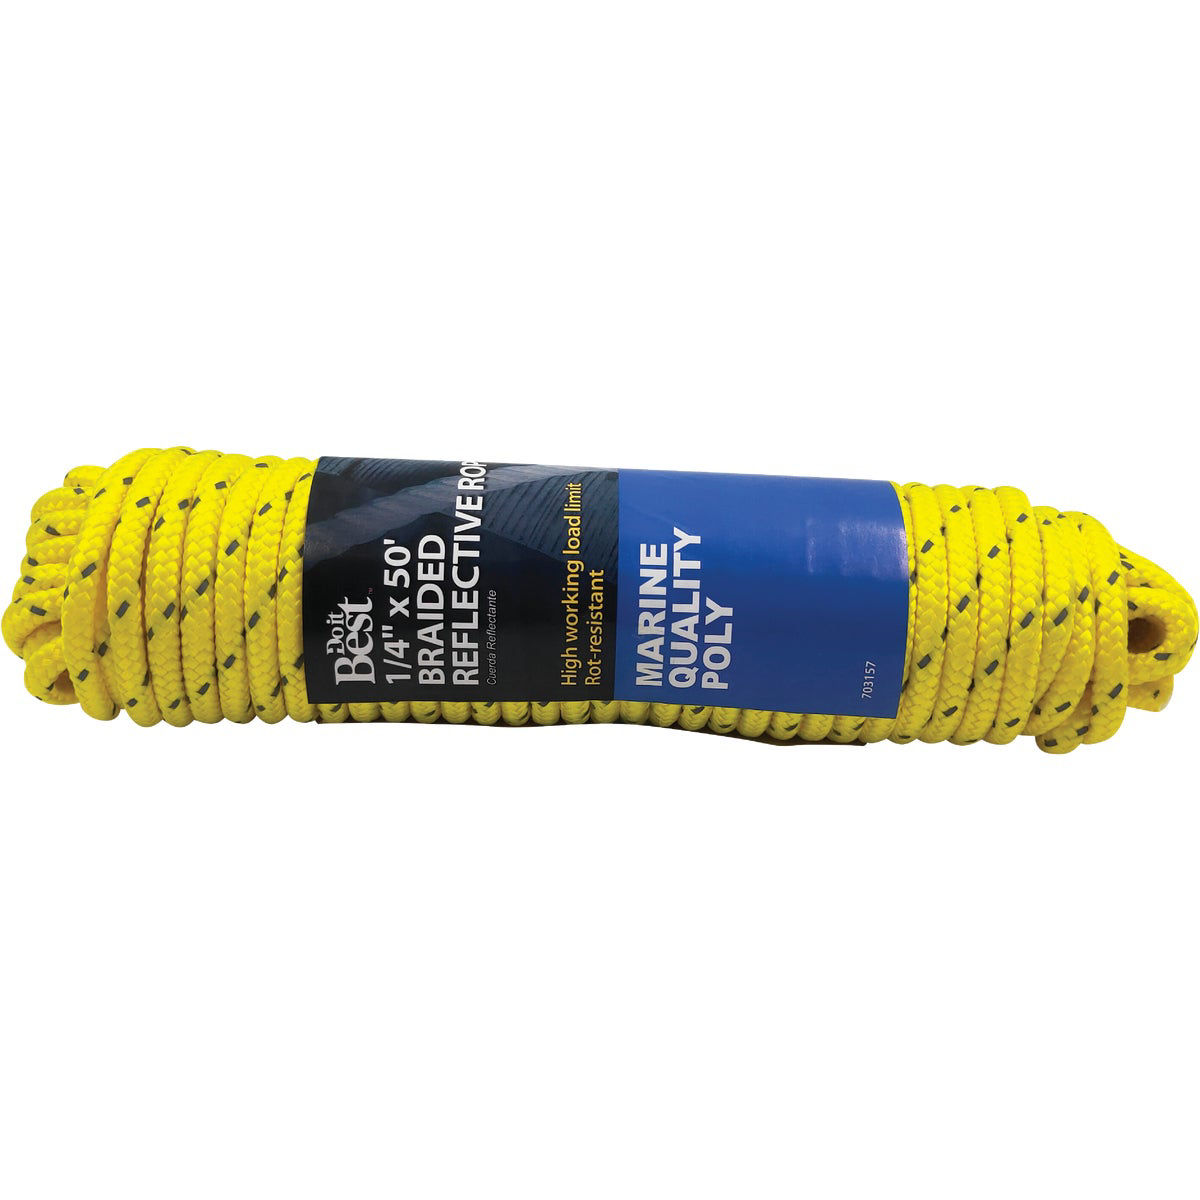 Do it Best 1/4 In. x 50 Ft. Yellow Braided Polypropylene Packaged